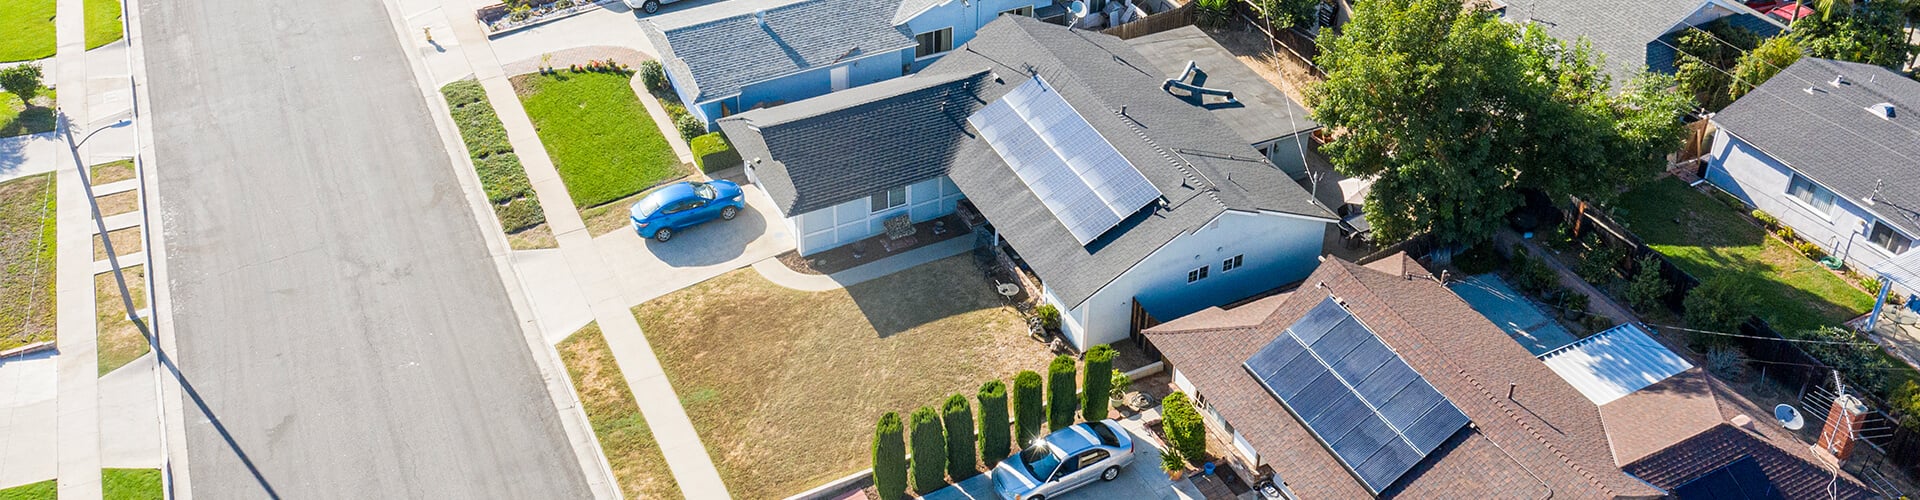 Popular Concerns that Aussie Homeowners Have on Going Solar